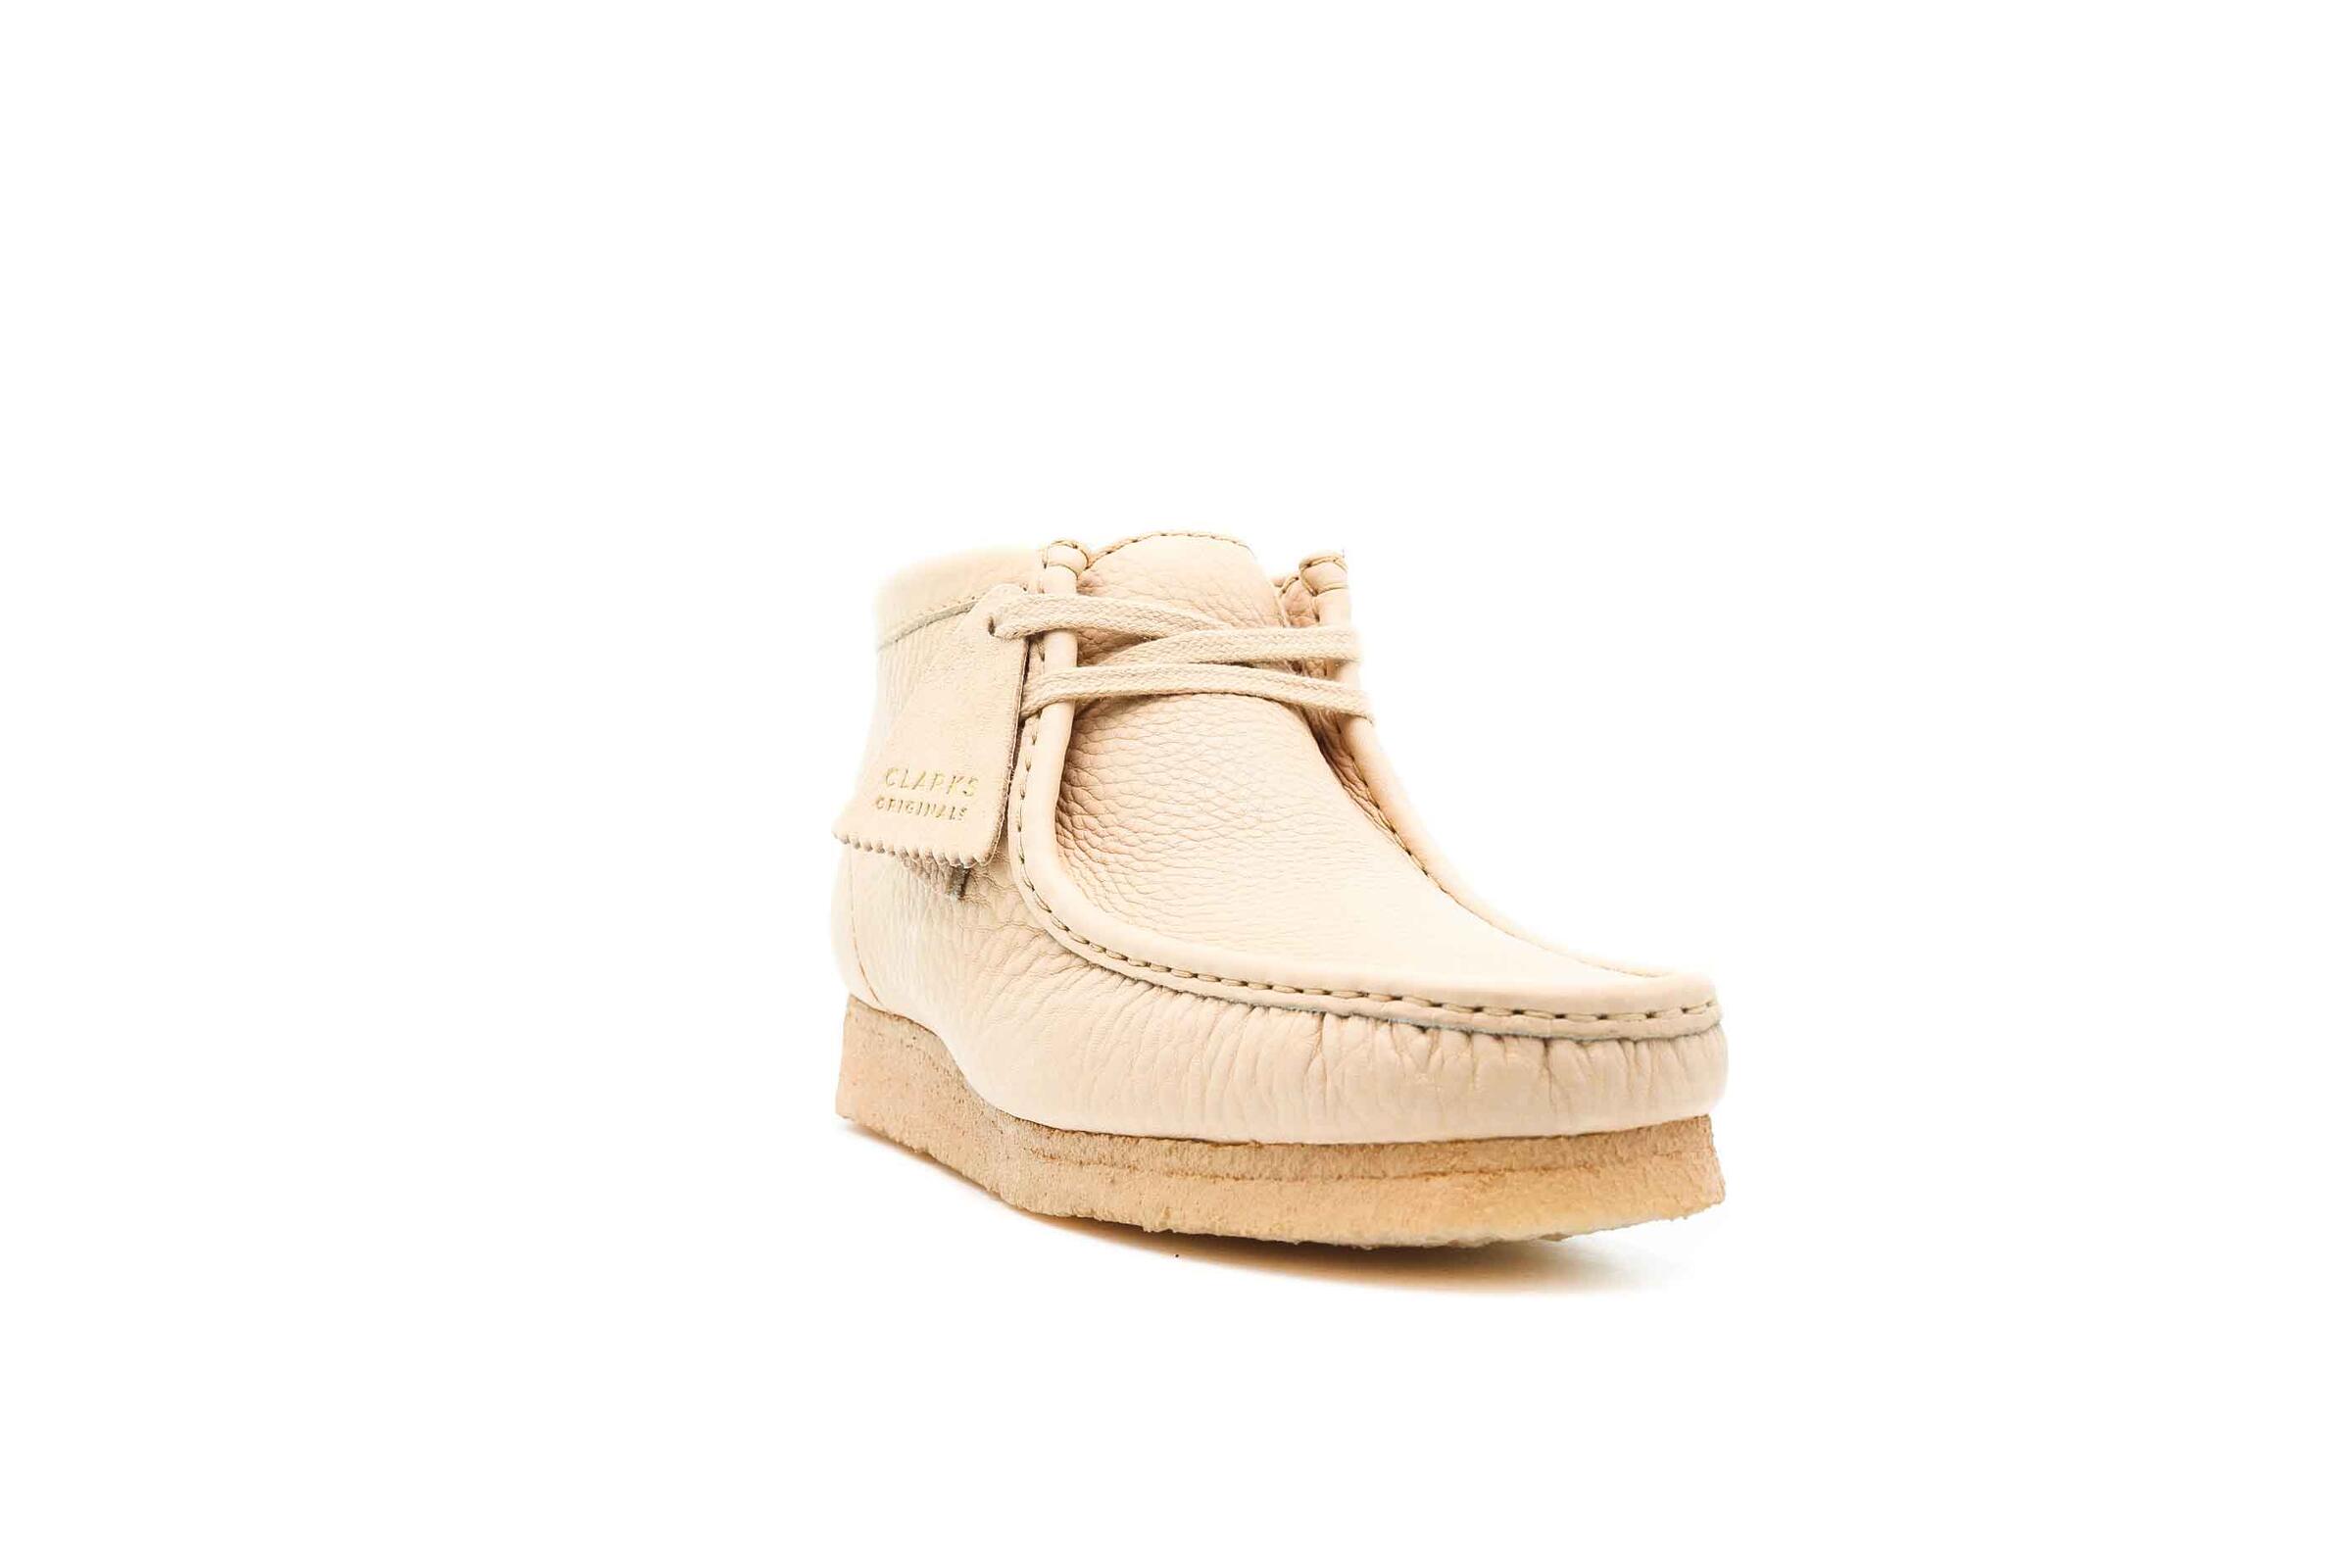 Clarks Originals x SPORTY AND RICH WALLABEE BOOT "OFF WHITE"